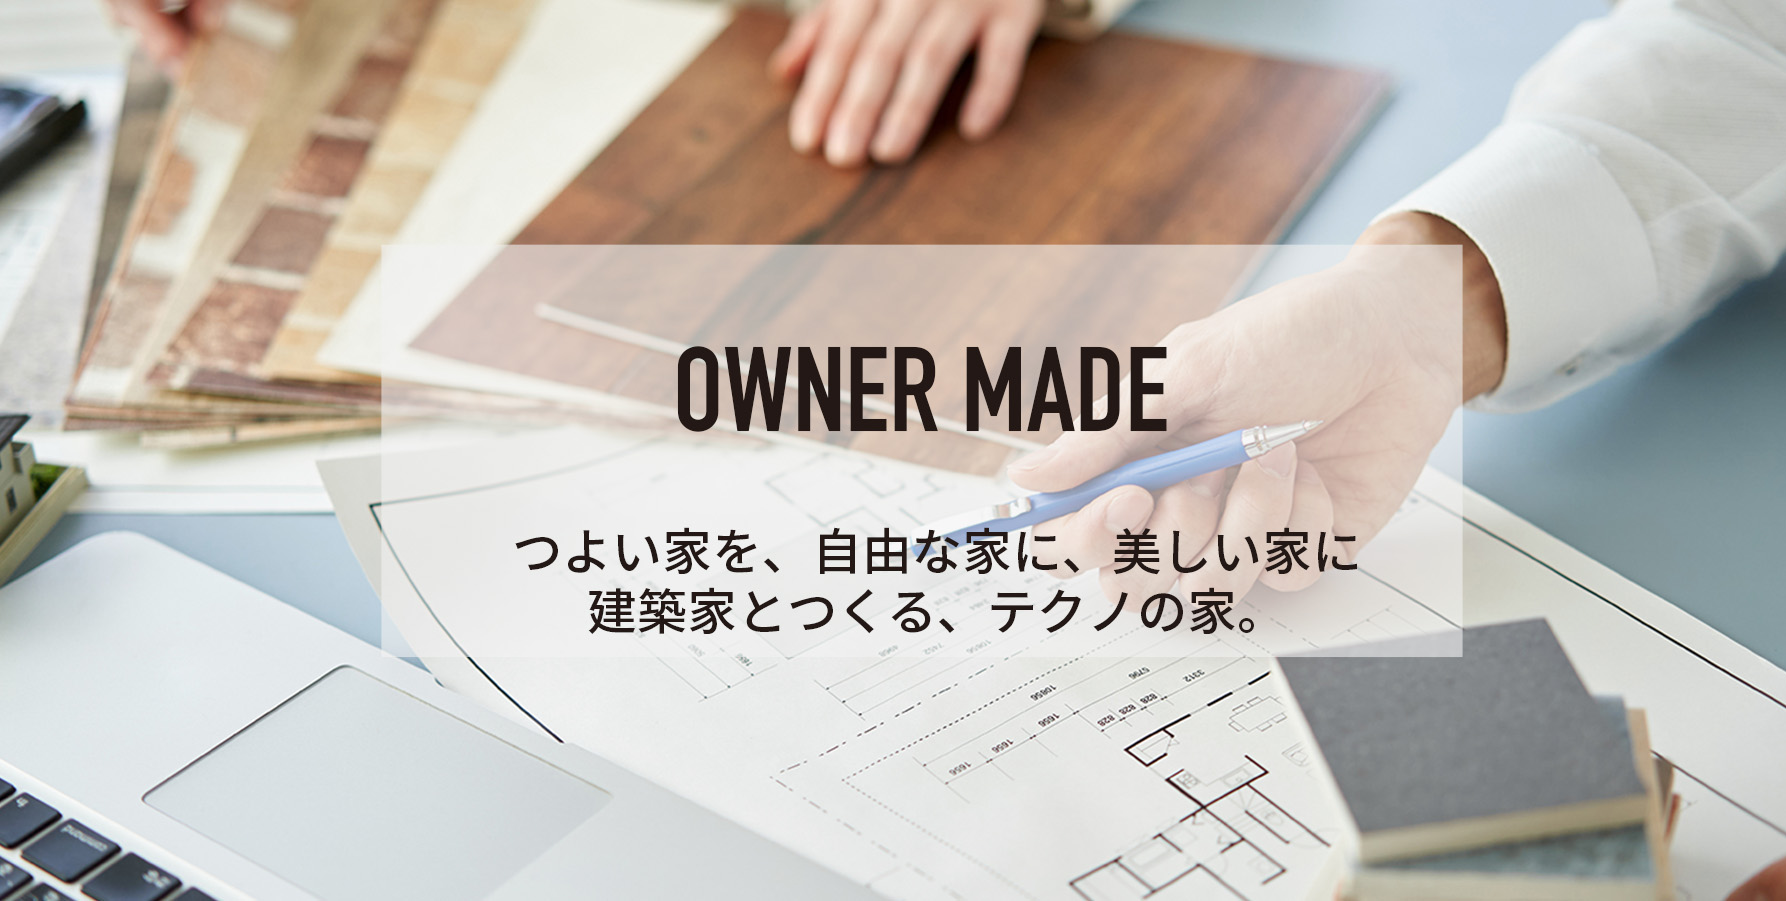 ownermade